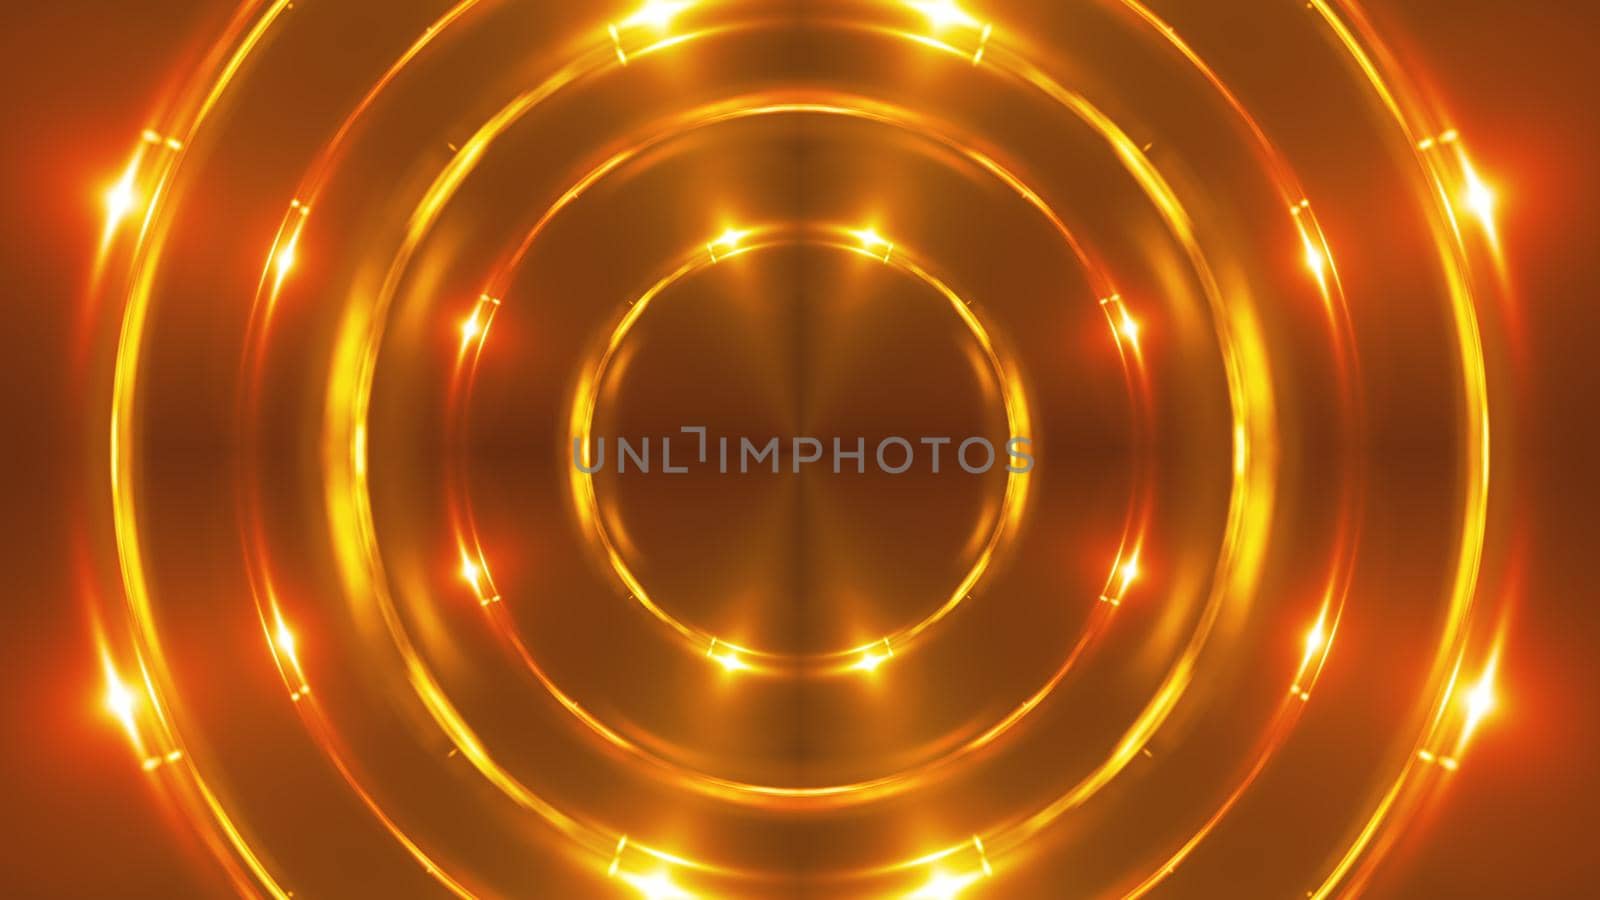 3d render of gold fractal lights with shining effects. Computer generated abstract background of flickering rings.